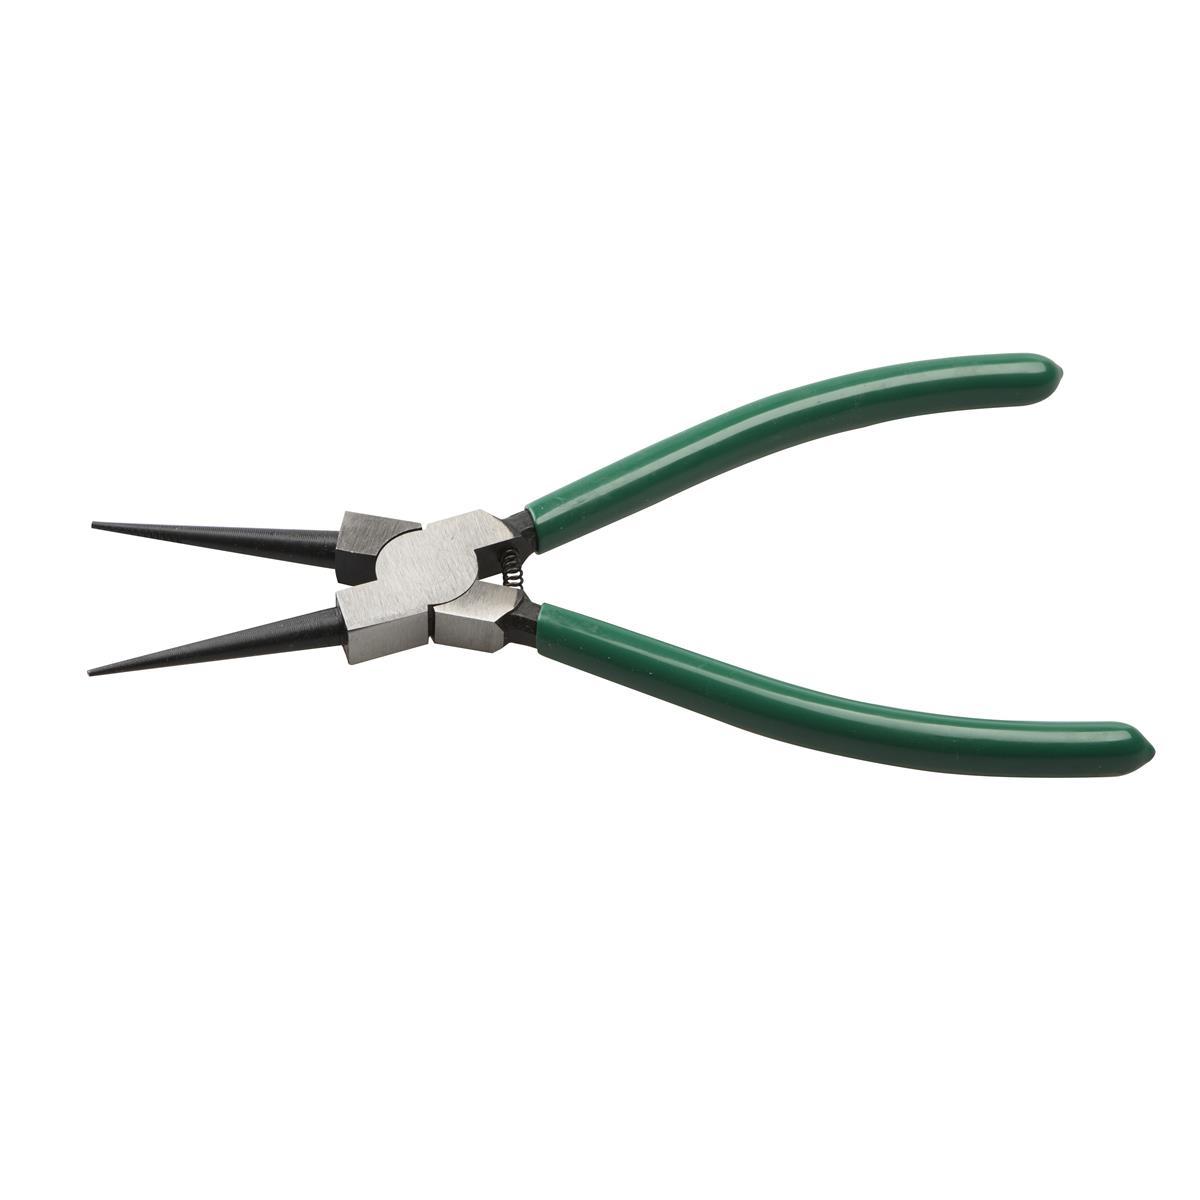 Acupoint straight jaw circlip pliers 13 